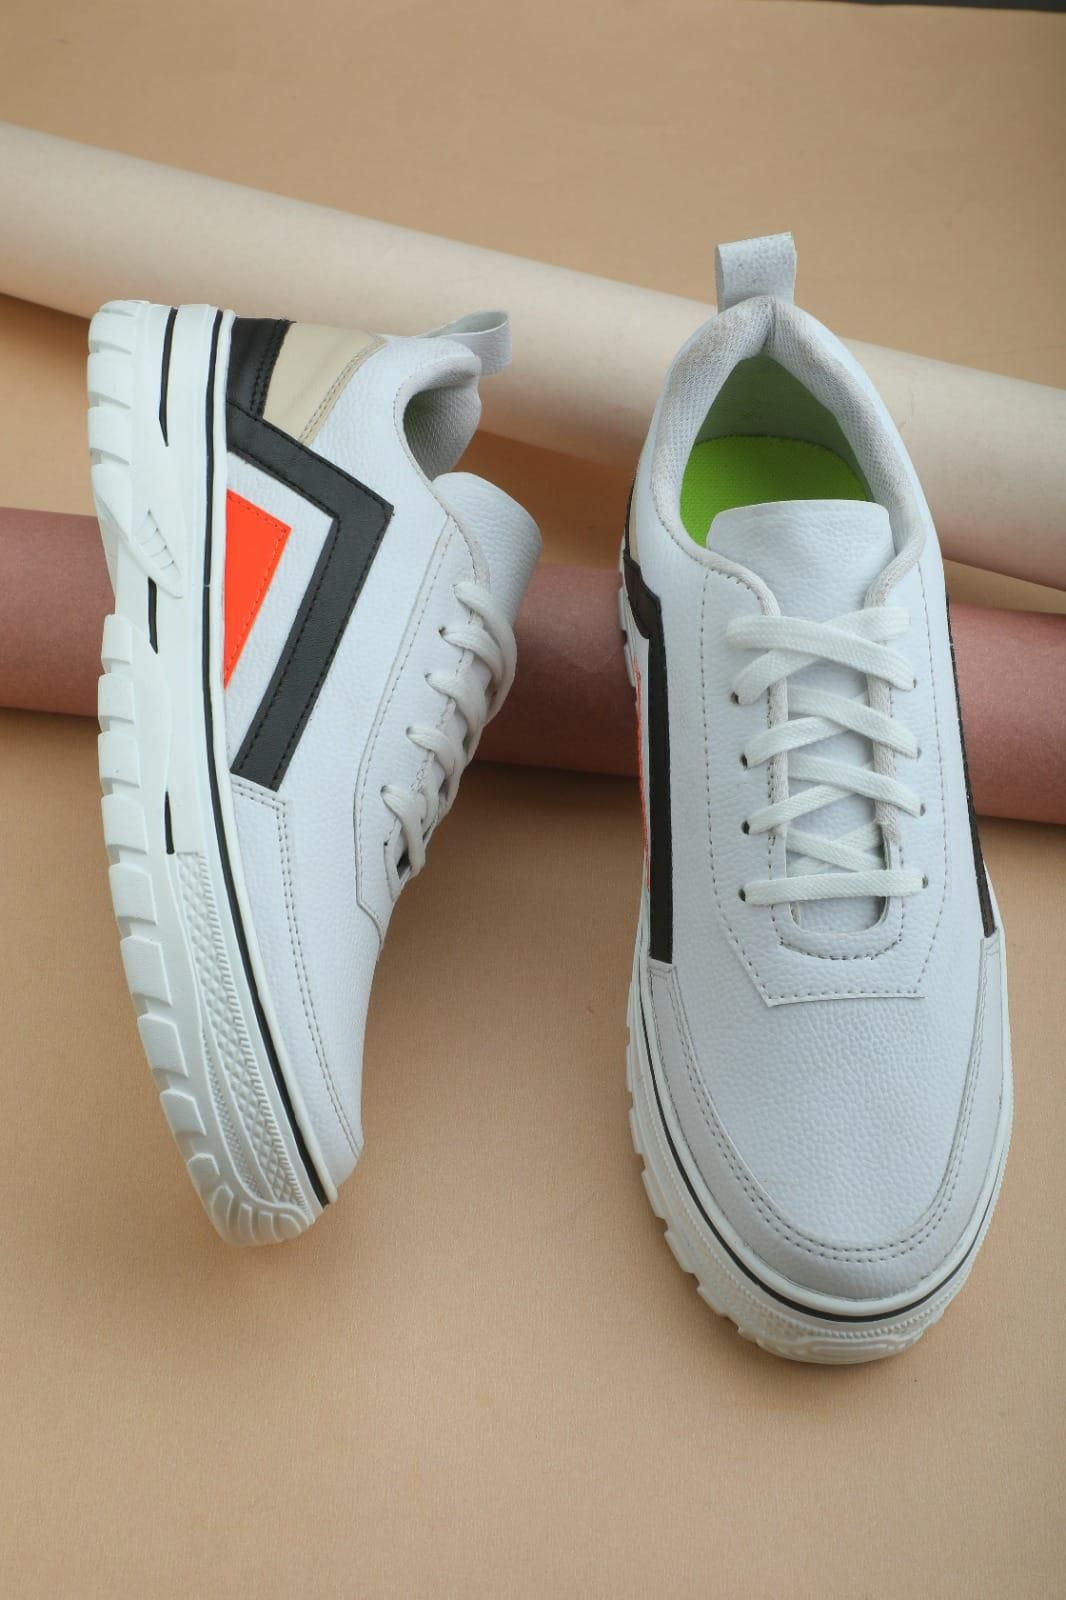 Men's Driving Fashionable Casual Shoes